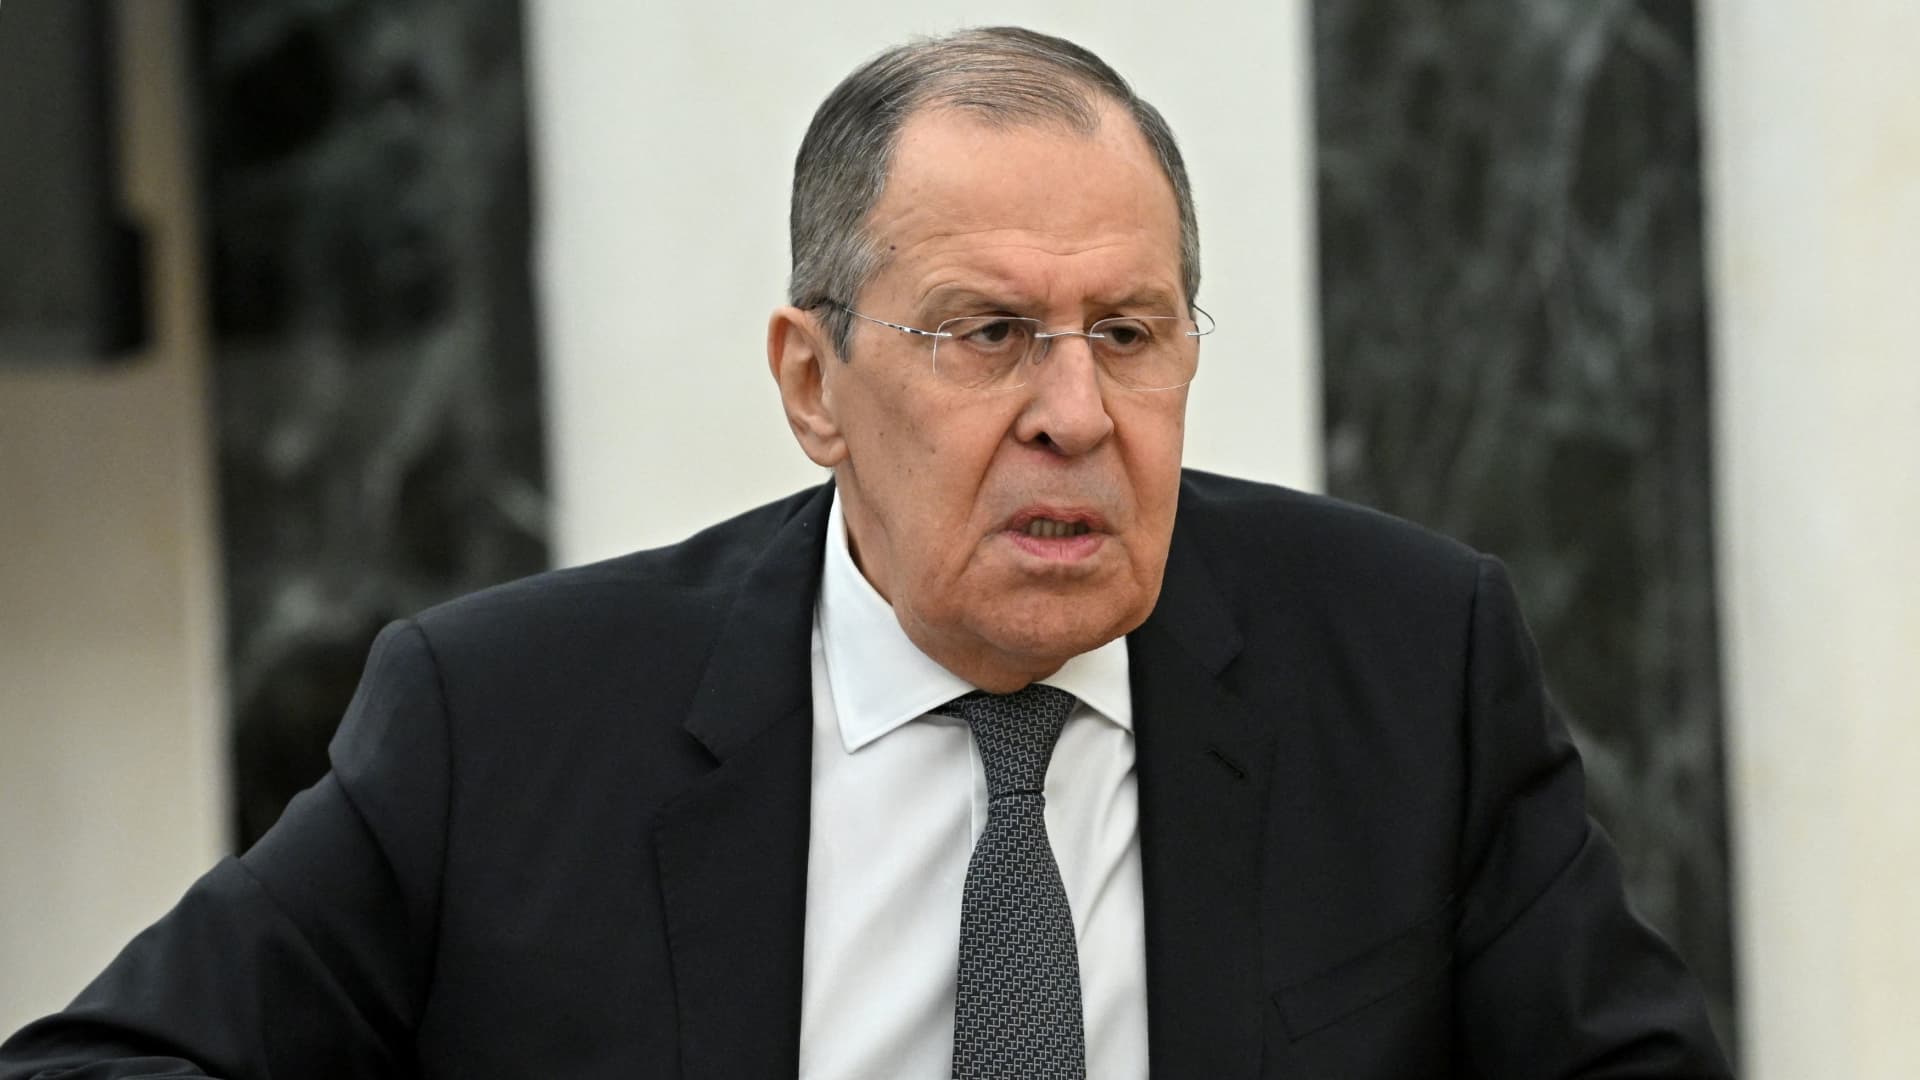 Russian Foreign Minister Sergei Lavrov attends a meeting with Russian President Vladimir Putin in Moscow, Russia February 14, 2022.